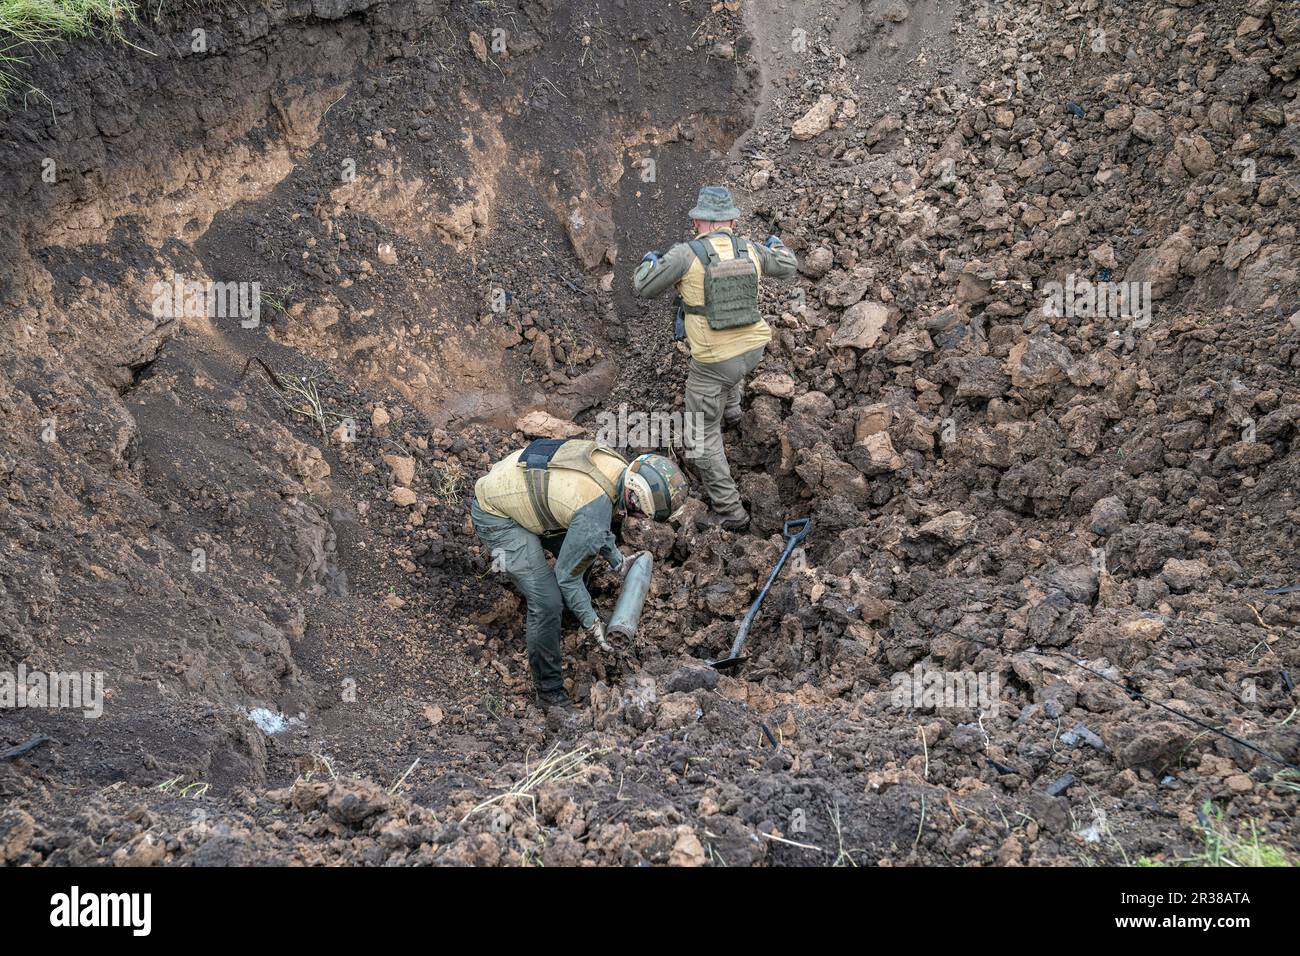 Members of National Guards of Ukraine de-mining unit prepare unexploded munition for controlled destruction by explosion near Kherson in Ukraine on May 22, 2023 Stock Photo